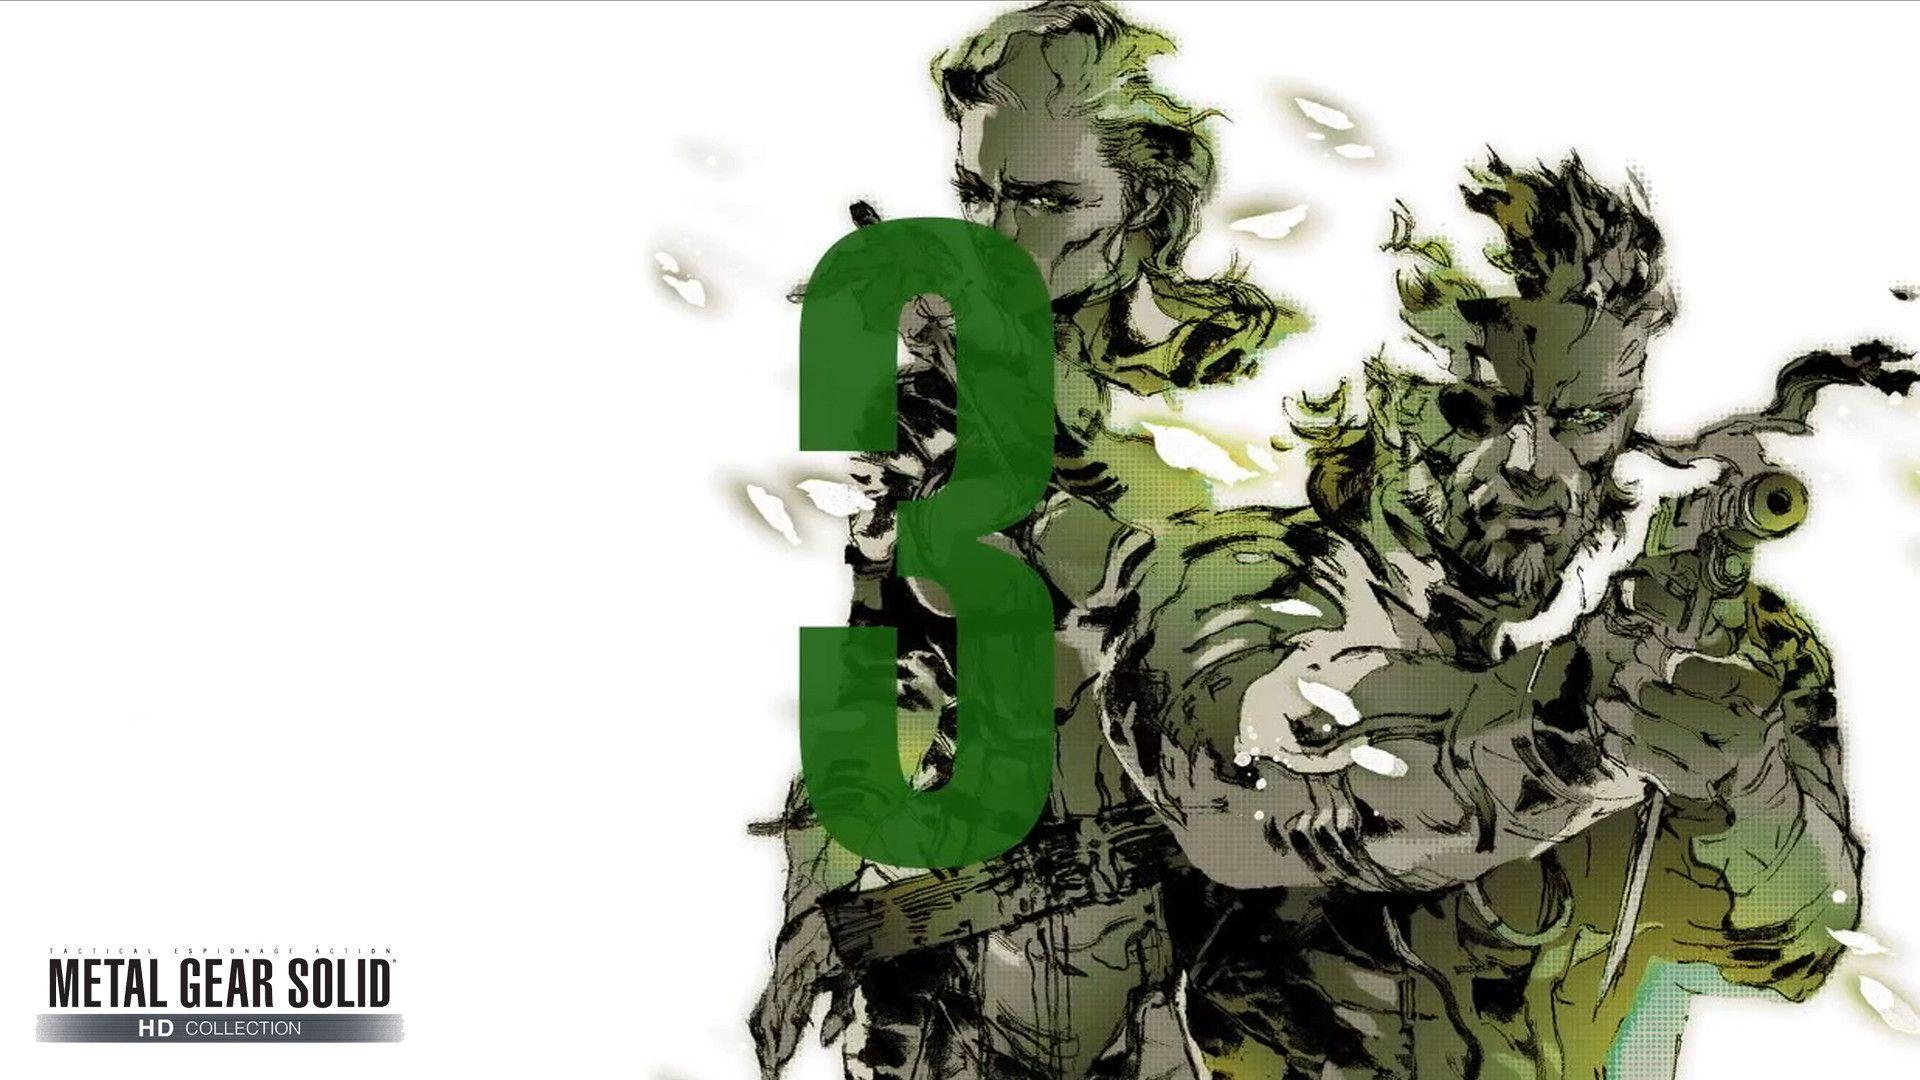 Metal Gear Solid HD COLLECTION (Unique) MGS3 By Outer Heaven1974